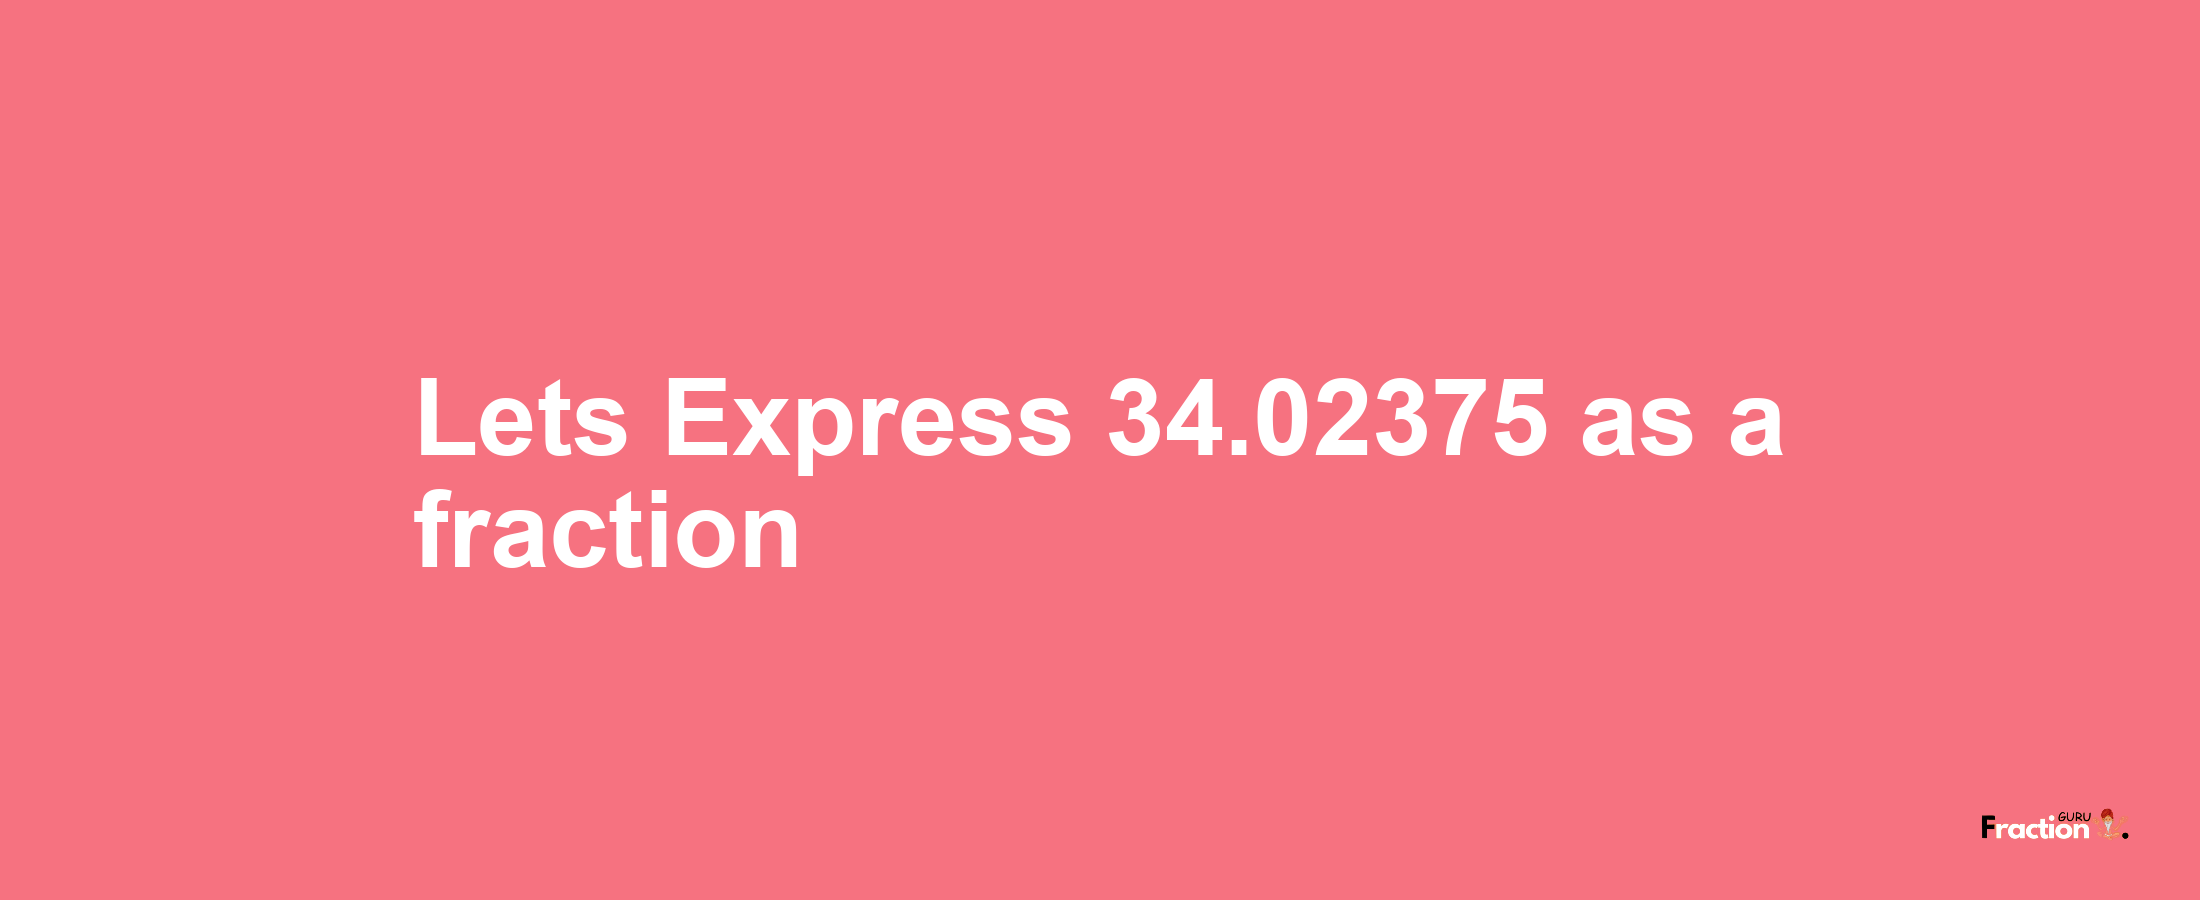 Lets Express 34.02375 as afraction